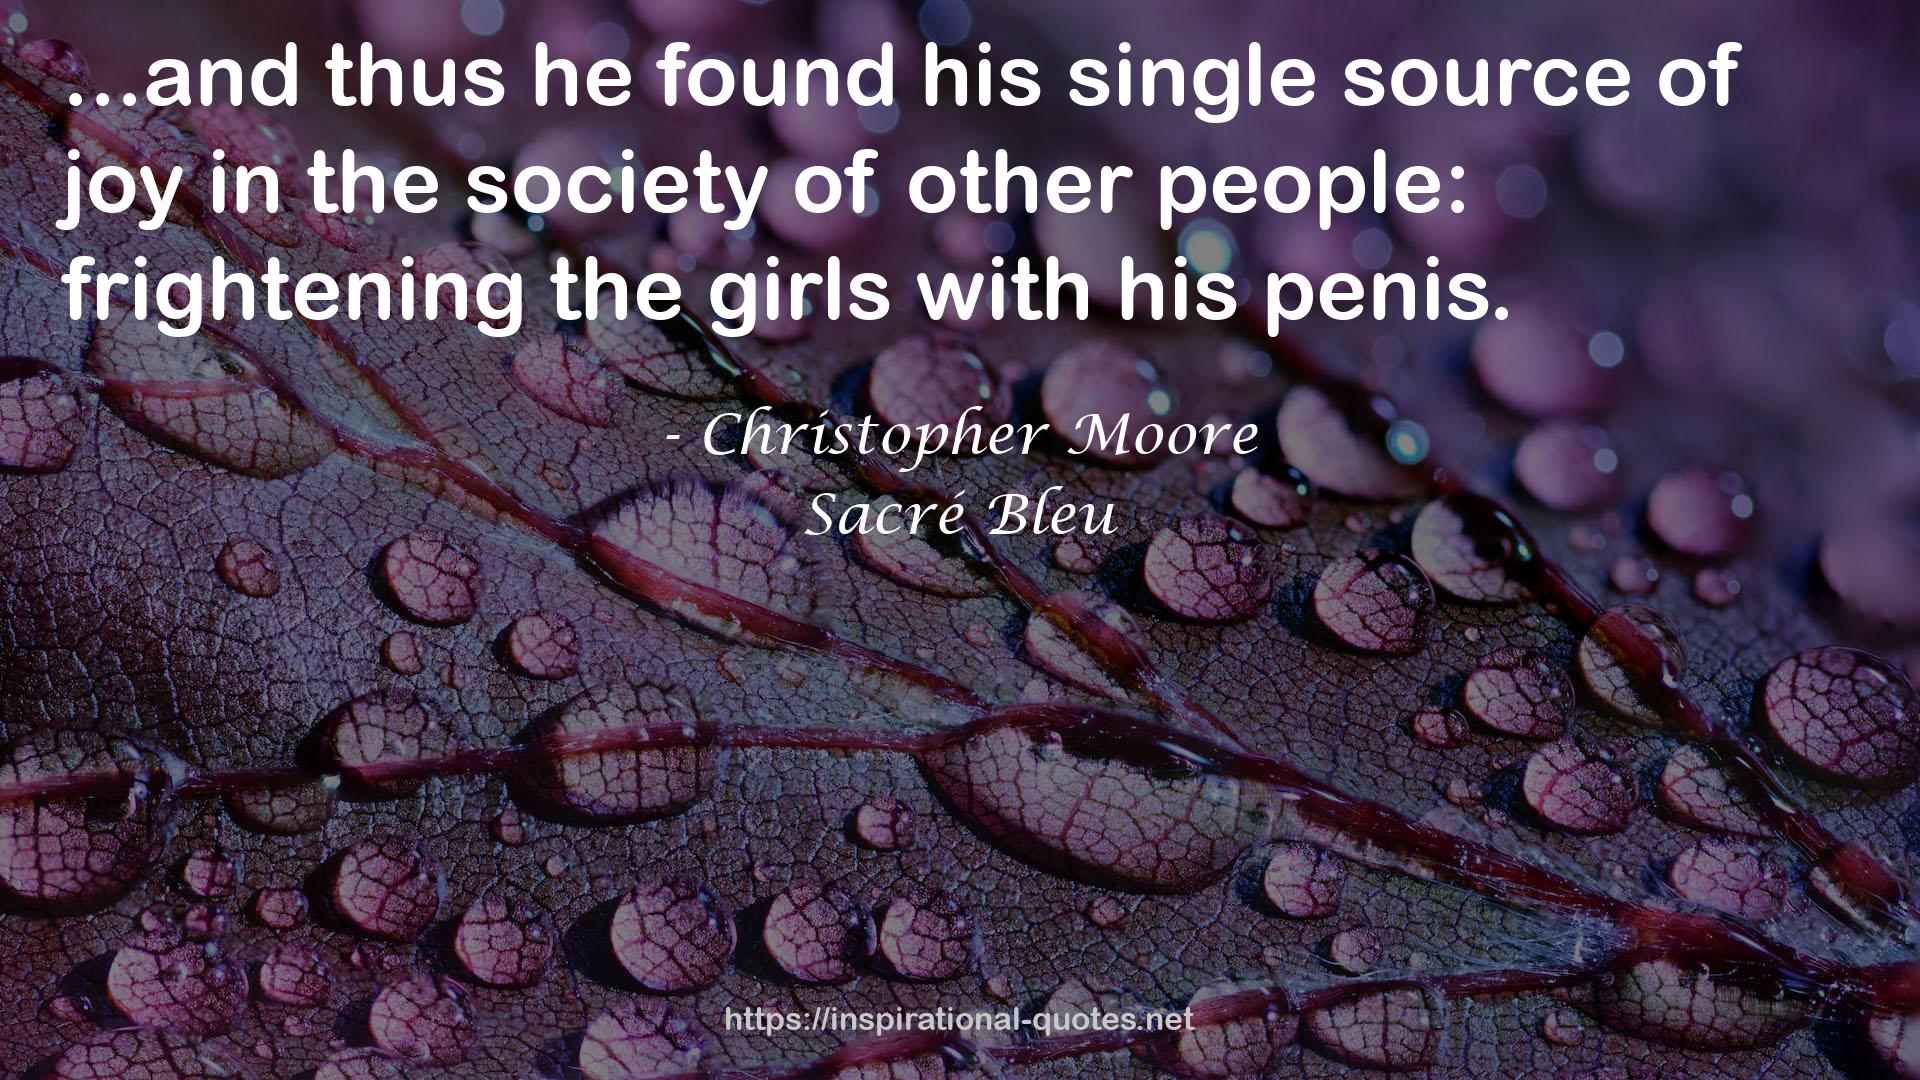 Christopher Moore QUOTES